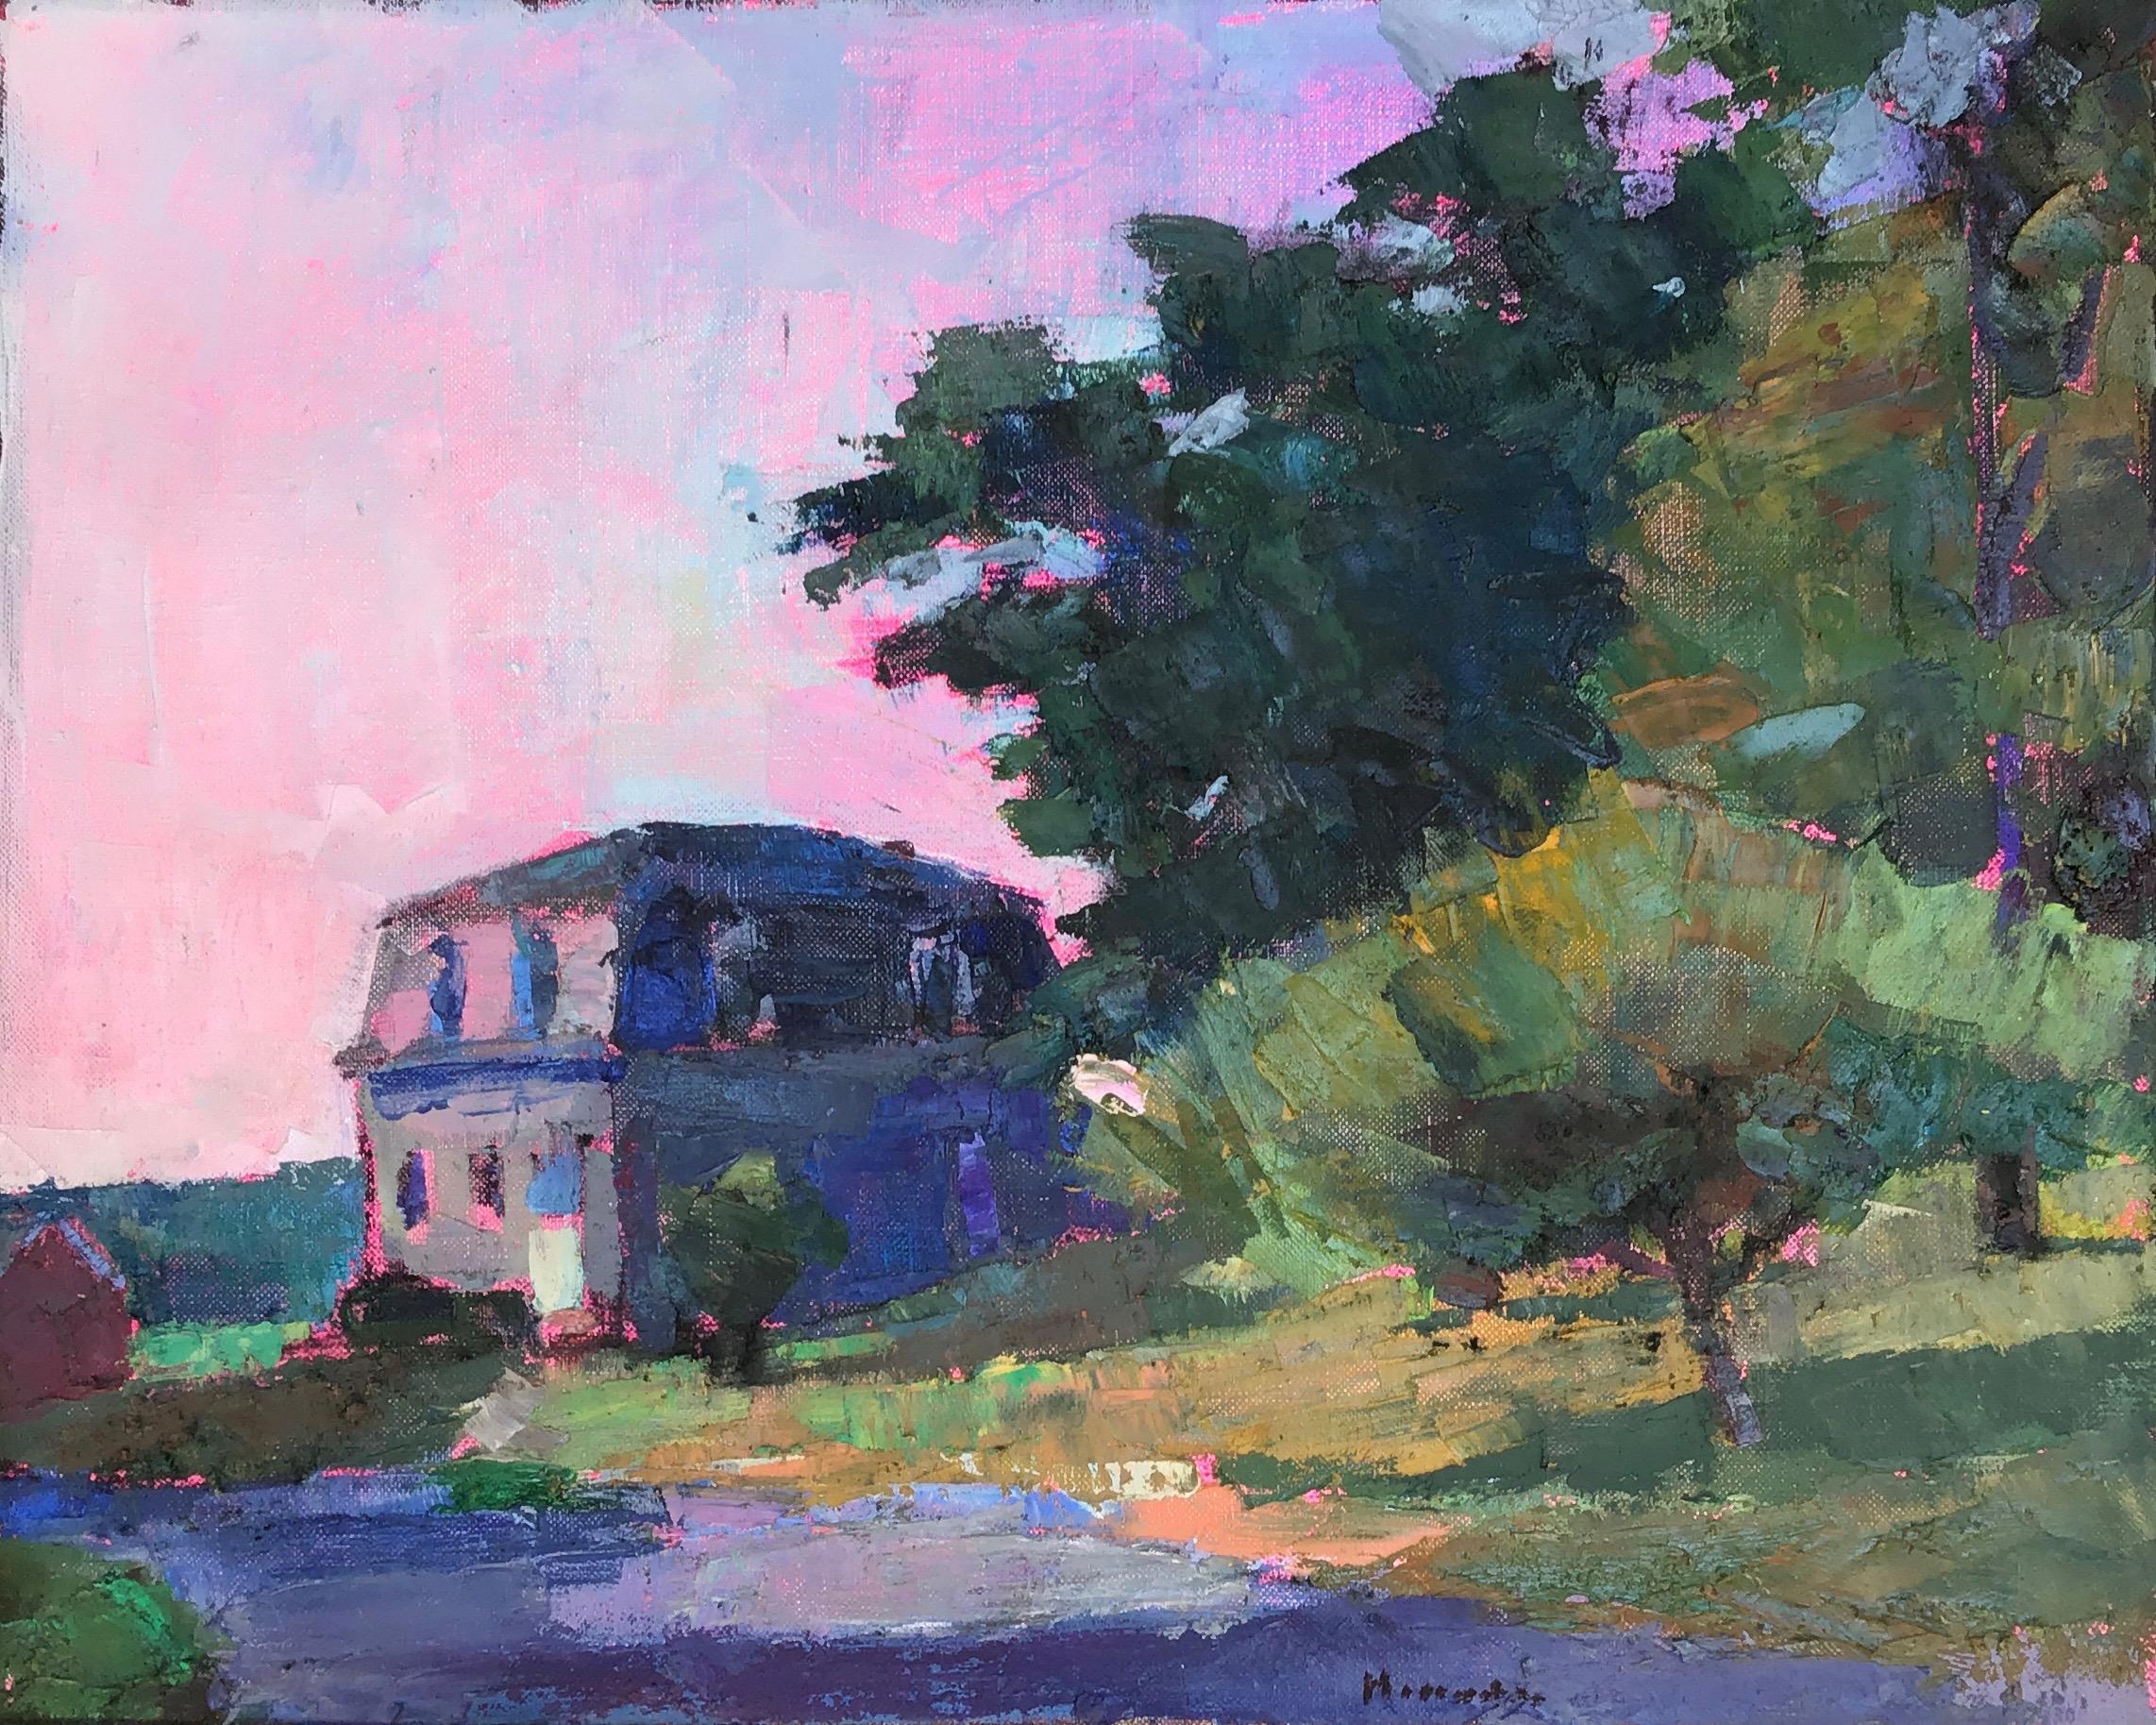 Larry Horowitz Landscape Painting - "Jules Besch" oil painting of a historic house with a pink sunset behind